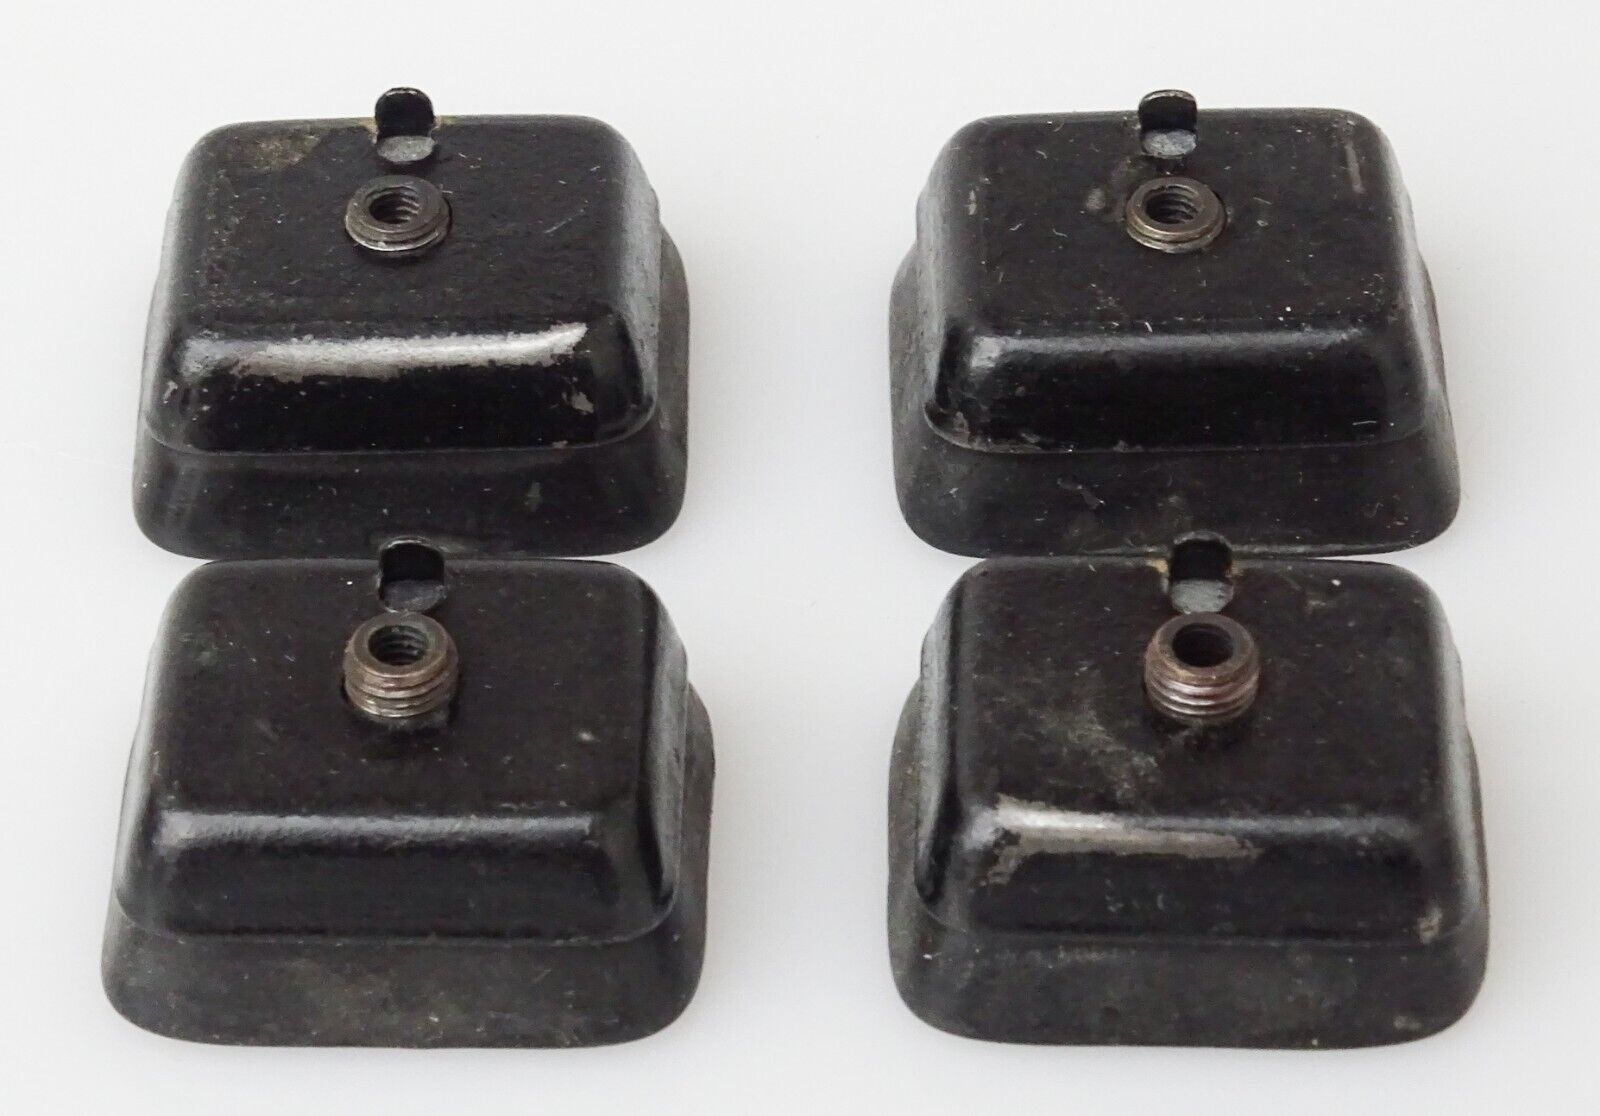 Antique Vintage Royal Quiet Deluxe Typewriter Parts Rubber Feet 1947